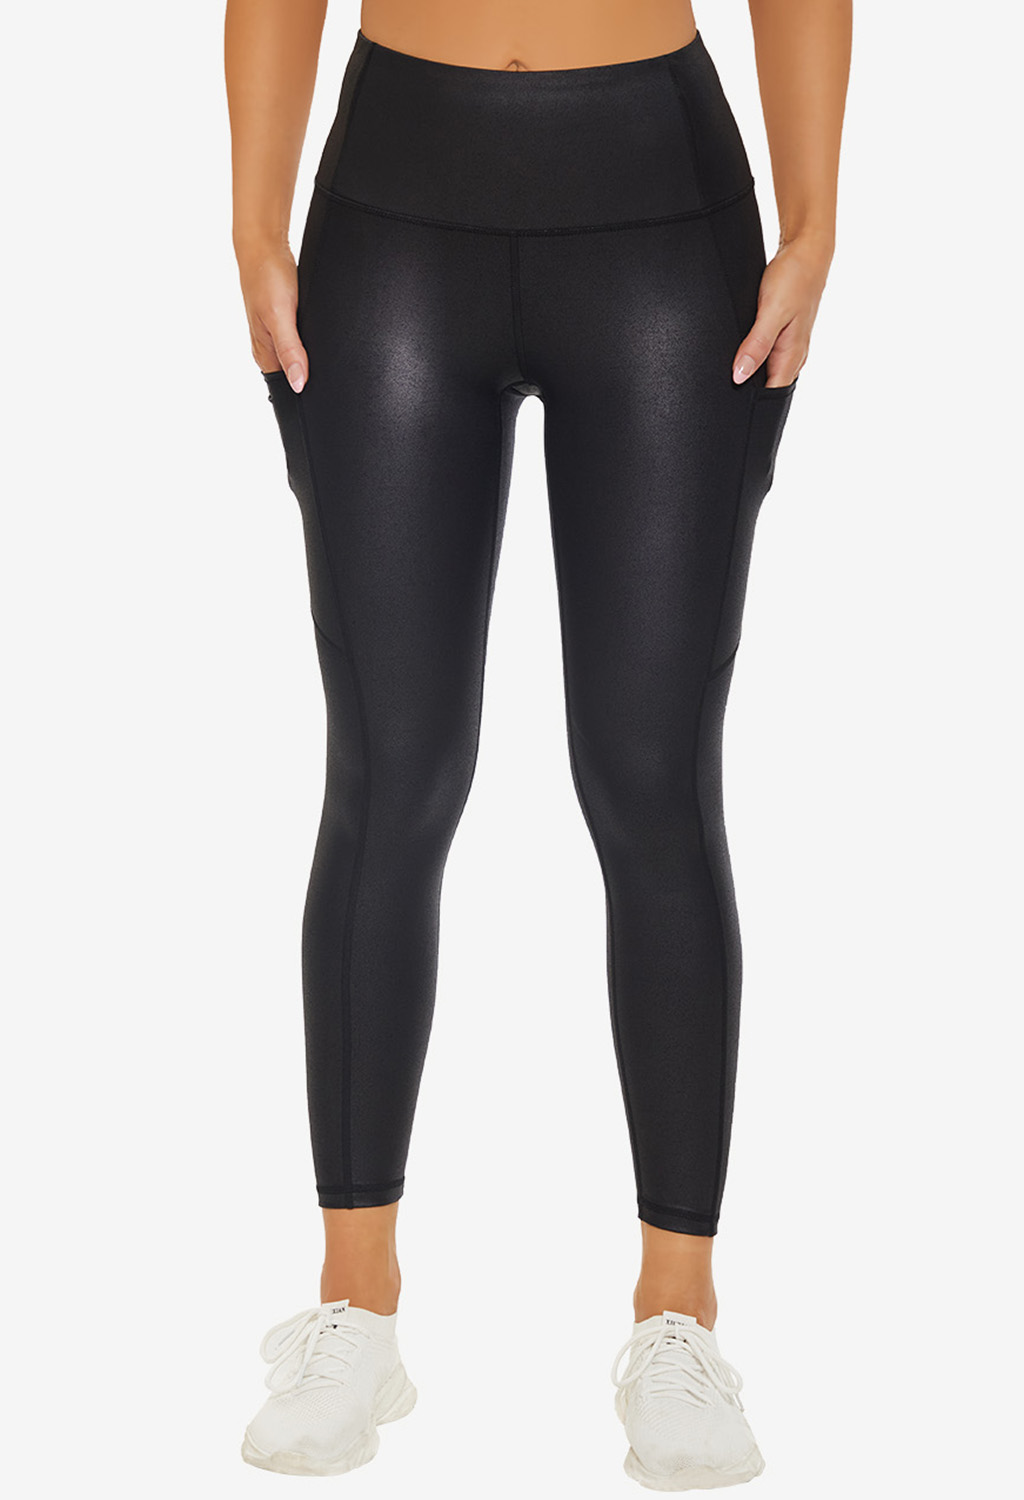 KYRIAD Matte Faux Leather Workout Leggings for Women Tummy Control